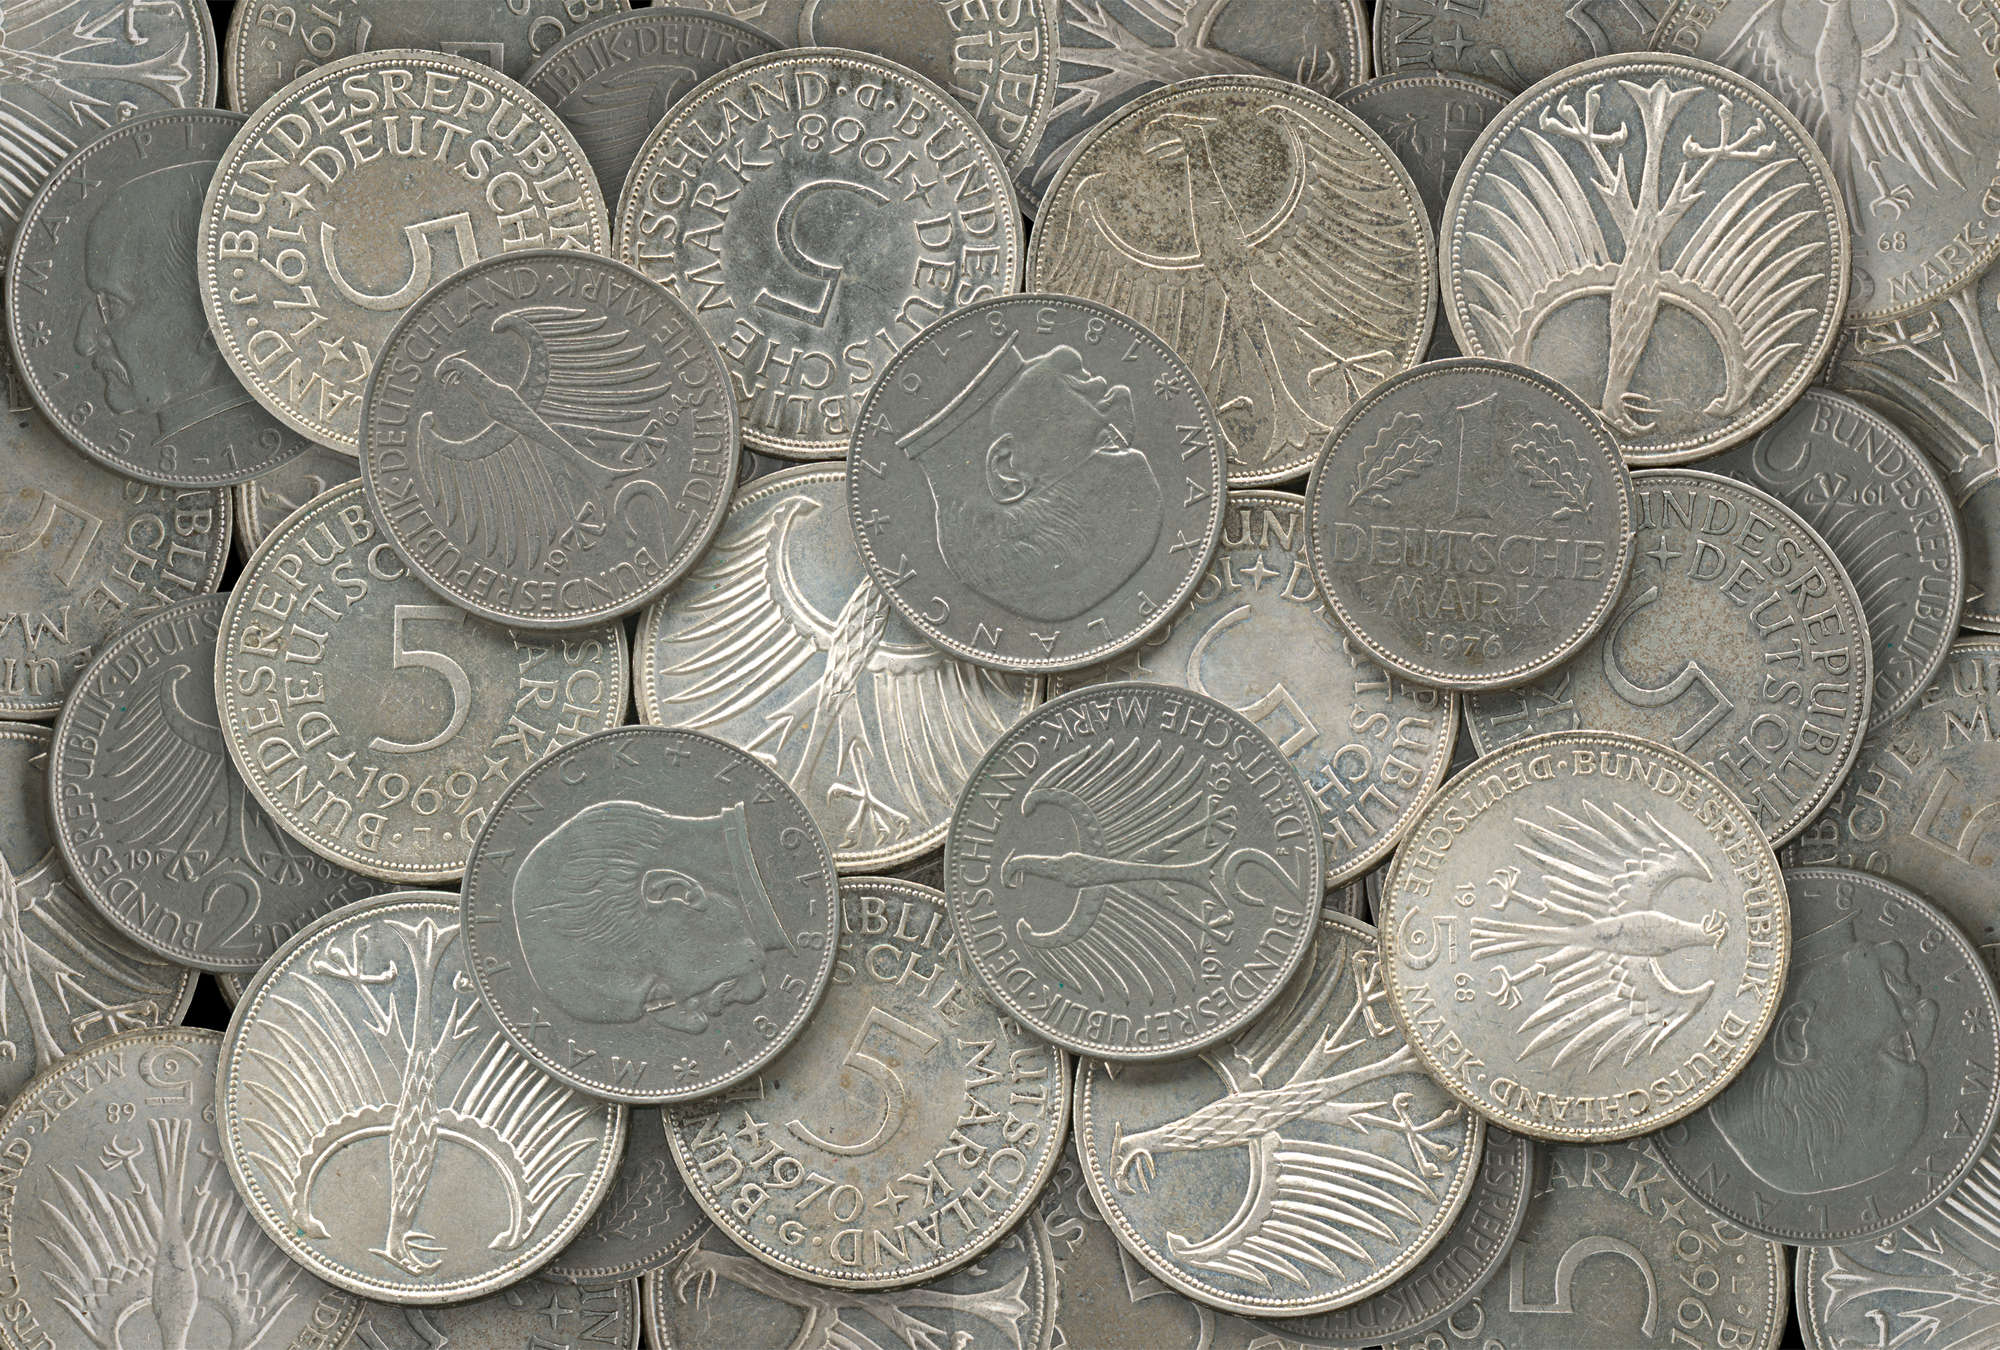             Silver coins mural in detail with 3D effect
        